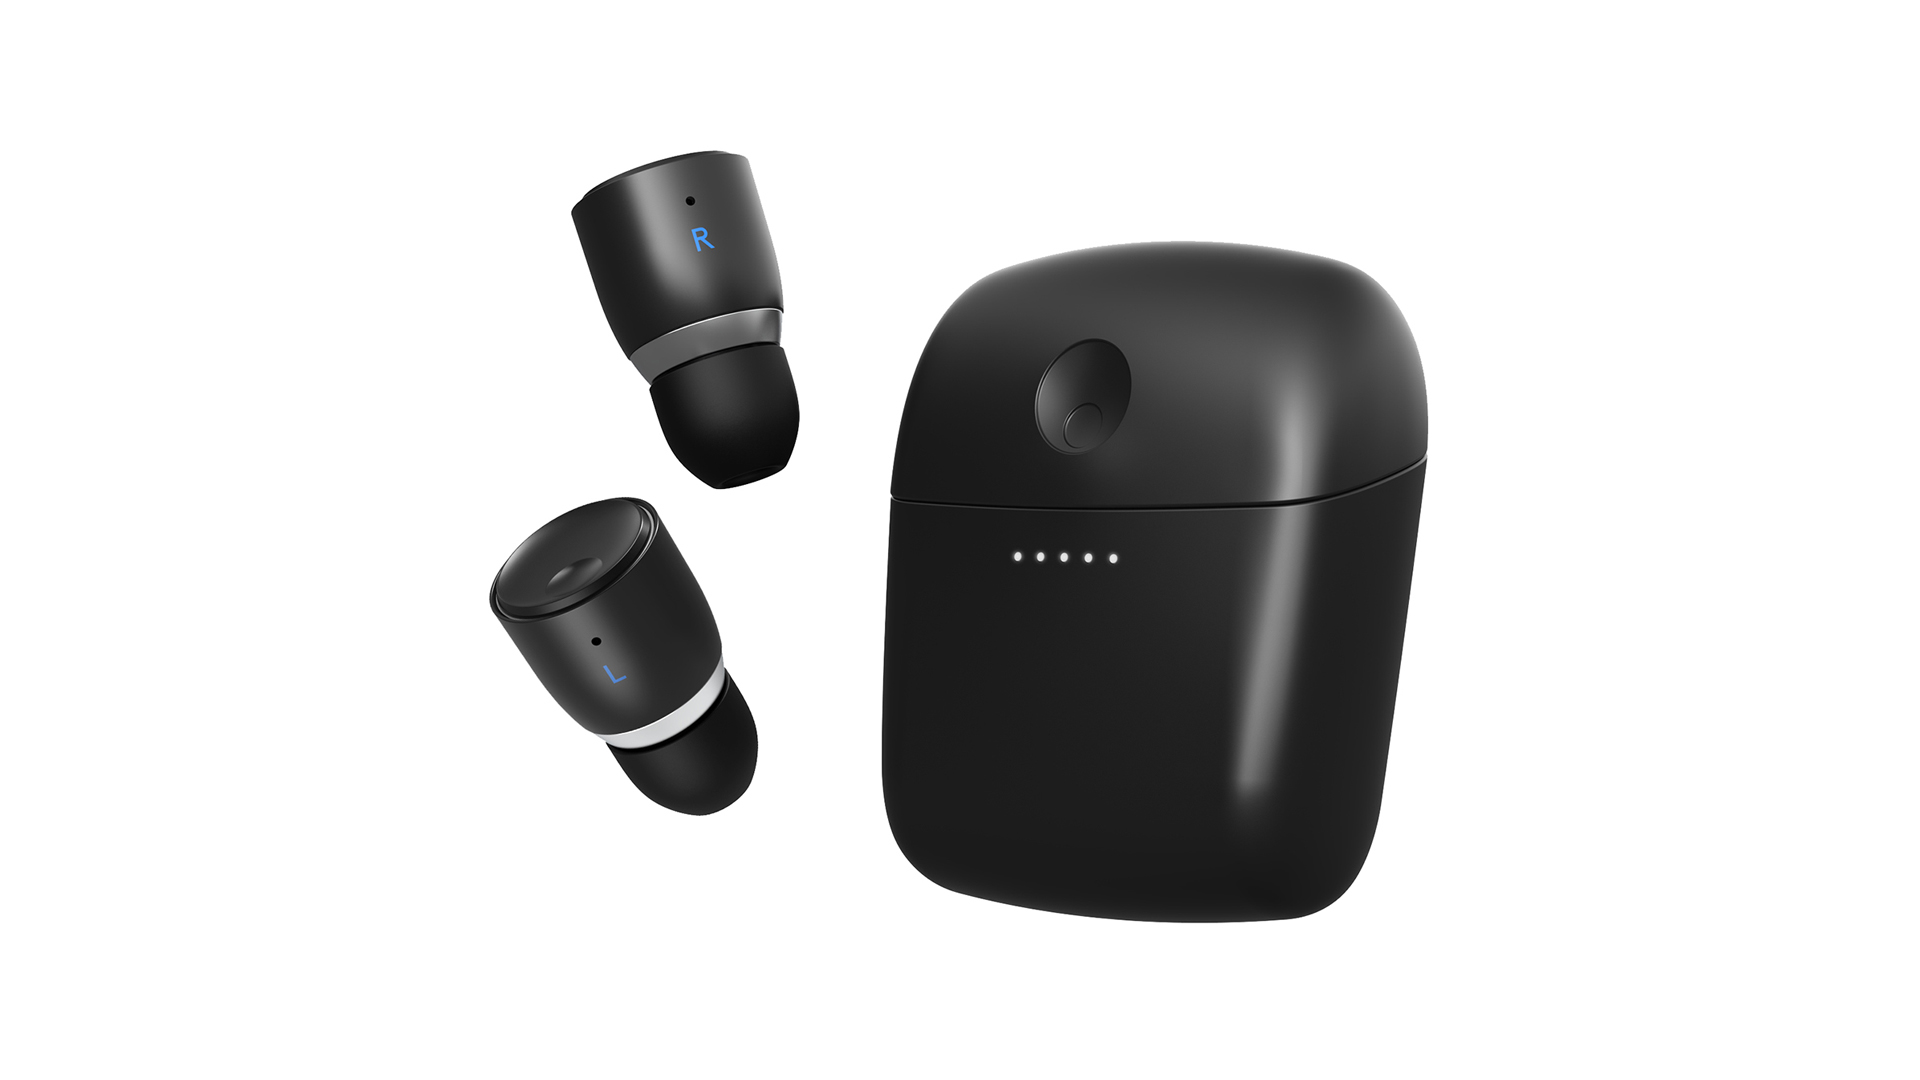 The cambridge audio melomania 1 plus true wireless earbuds, with the earbuds on the left and the charging case on the right